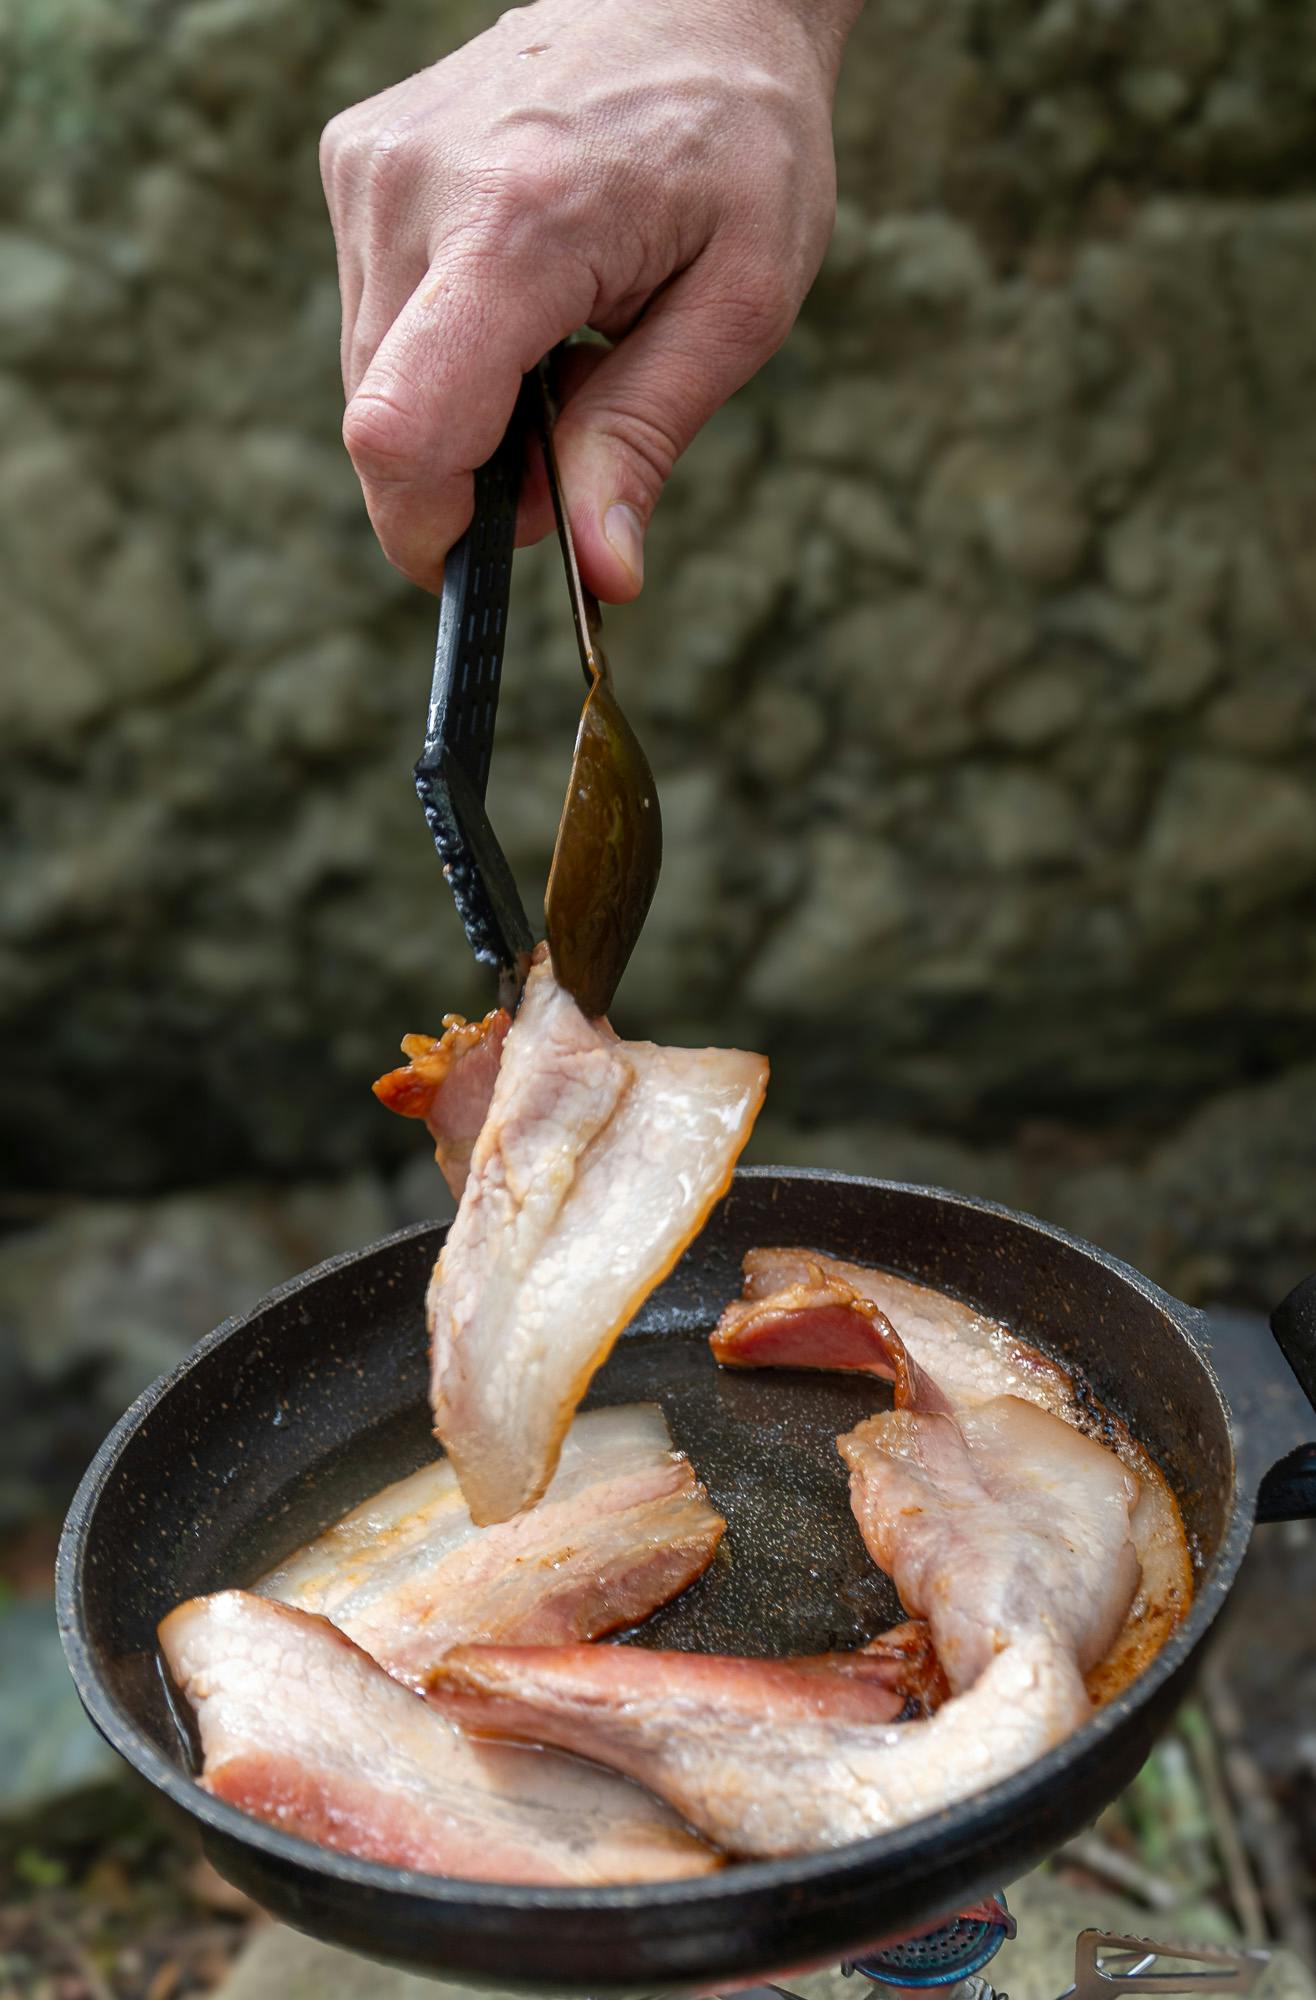 Frying bacon with the Gerber Compleat tongs.